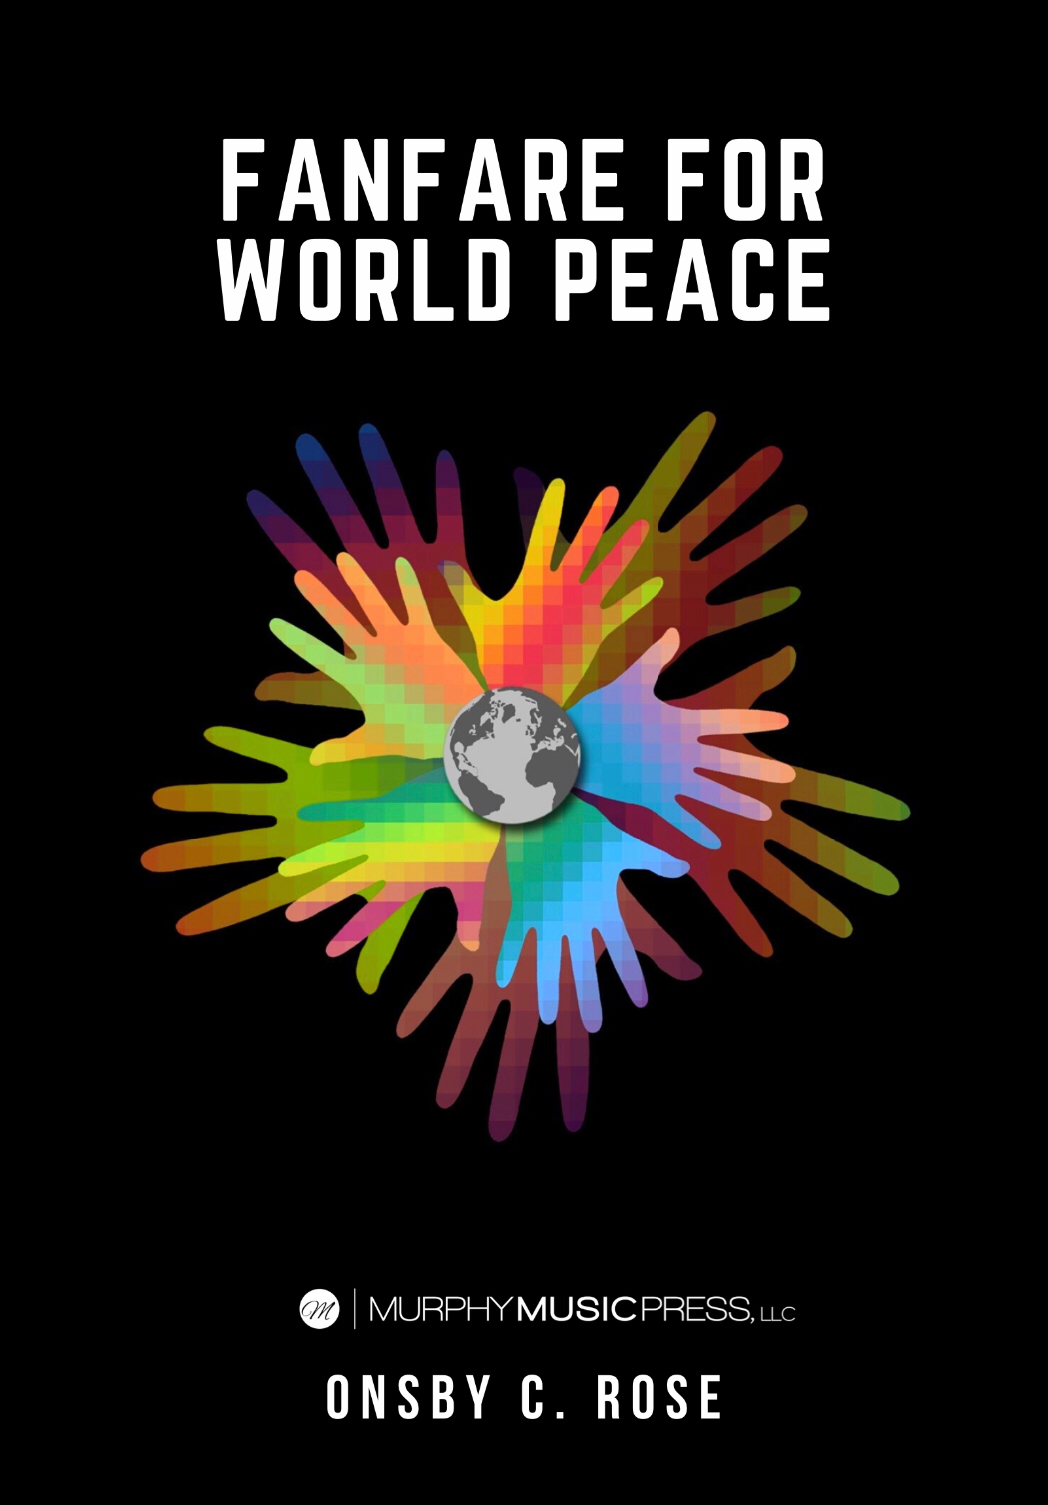 Fanfare For World Peace (Score Only) by Onsby C. Rose